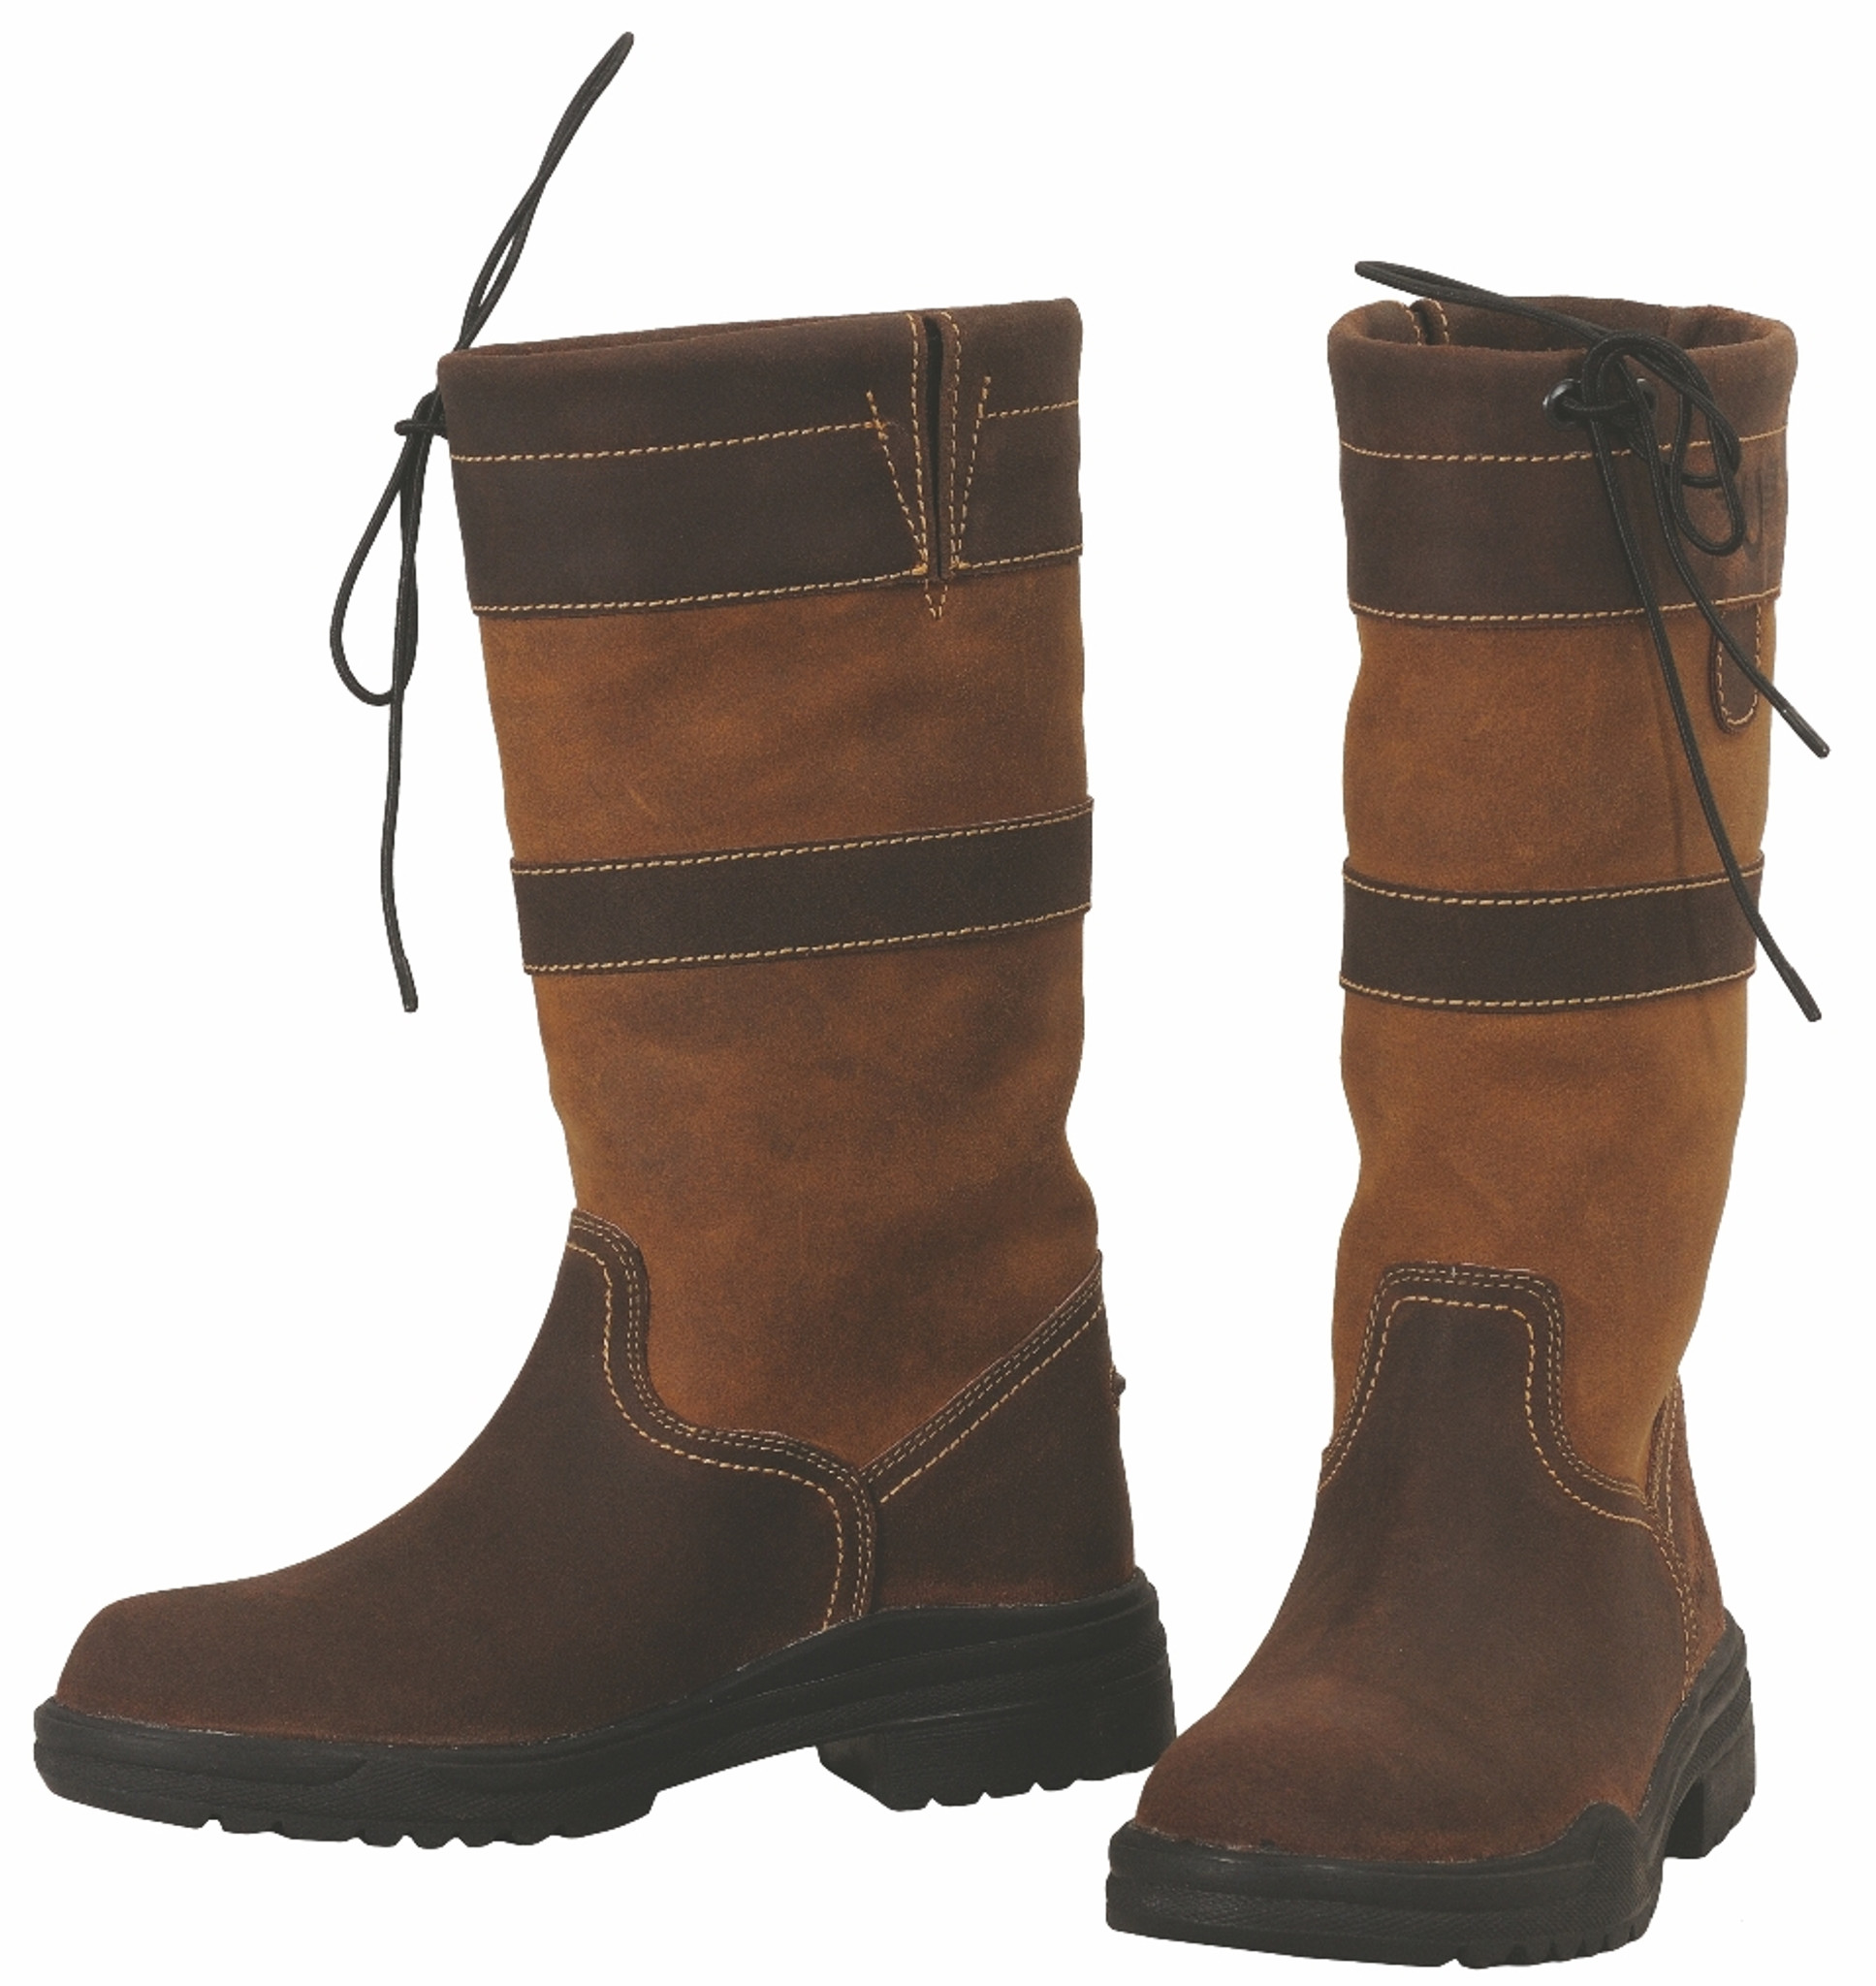 Tuffrider Low Country Waterproof Boots Short The Lexington Horse